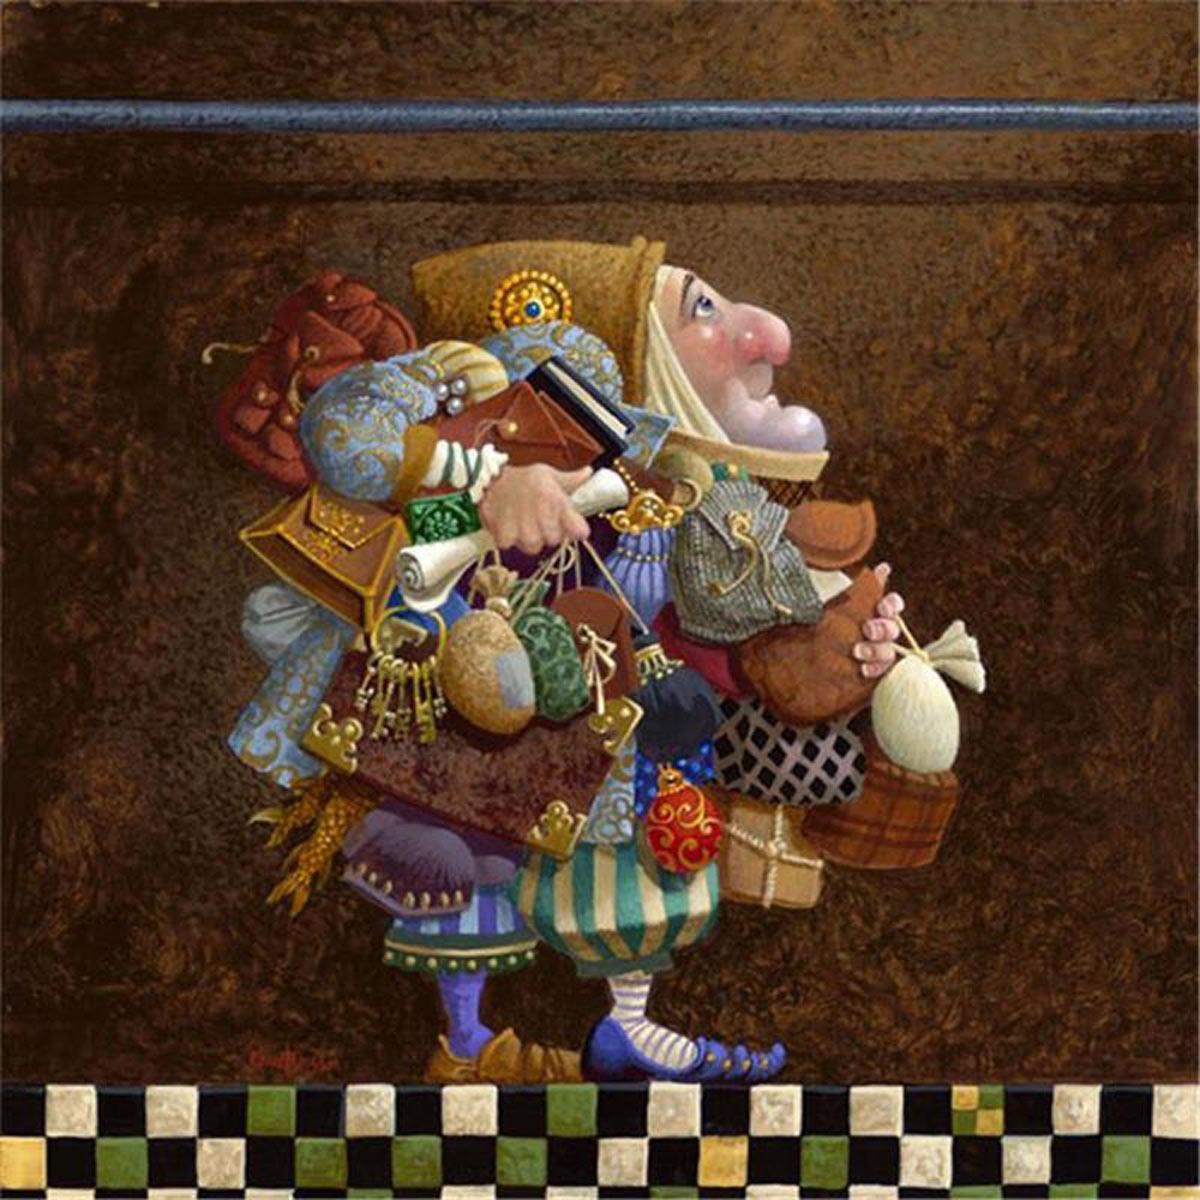 Hold To The Rod, The Iron Rod by James Christensen –